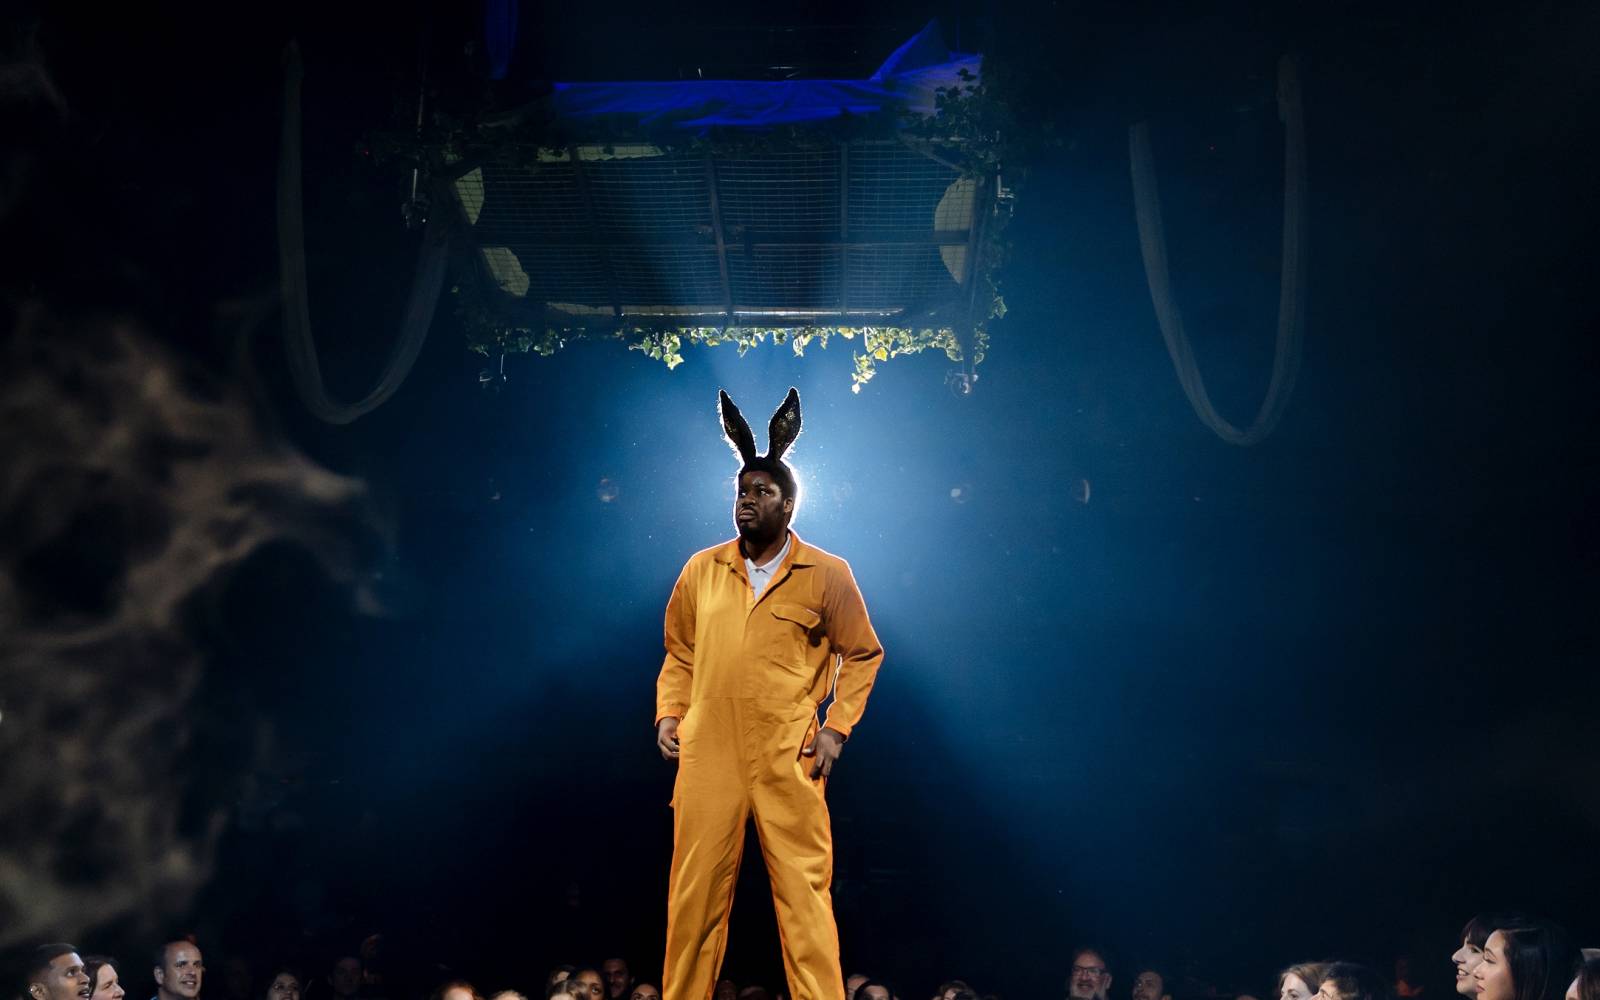 Hammed Animashaun (Bottom) stands in the spotlight, wearing donkey ears, surrounded by a crowd